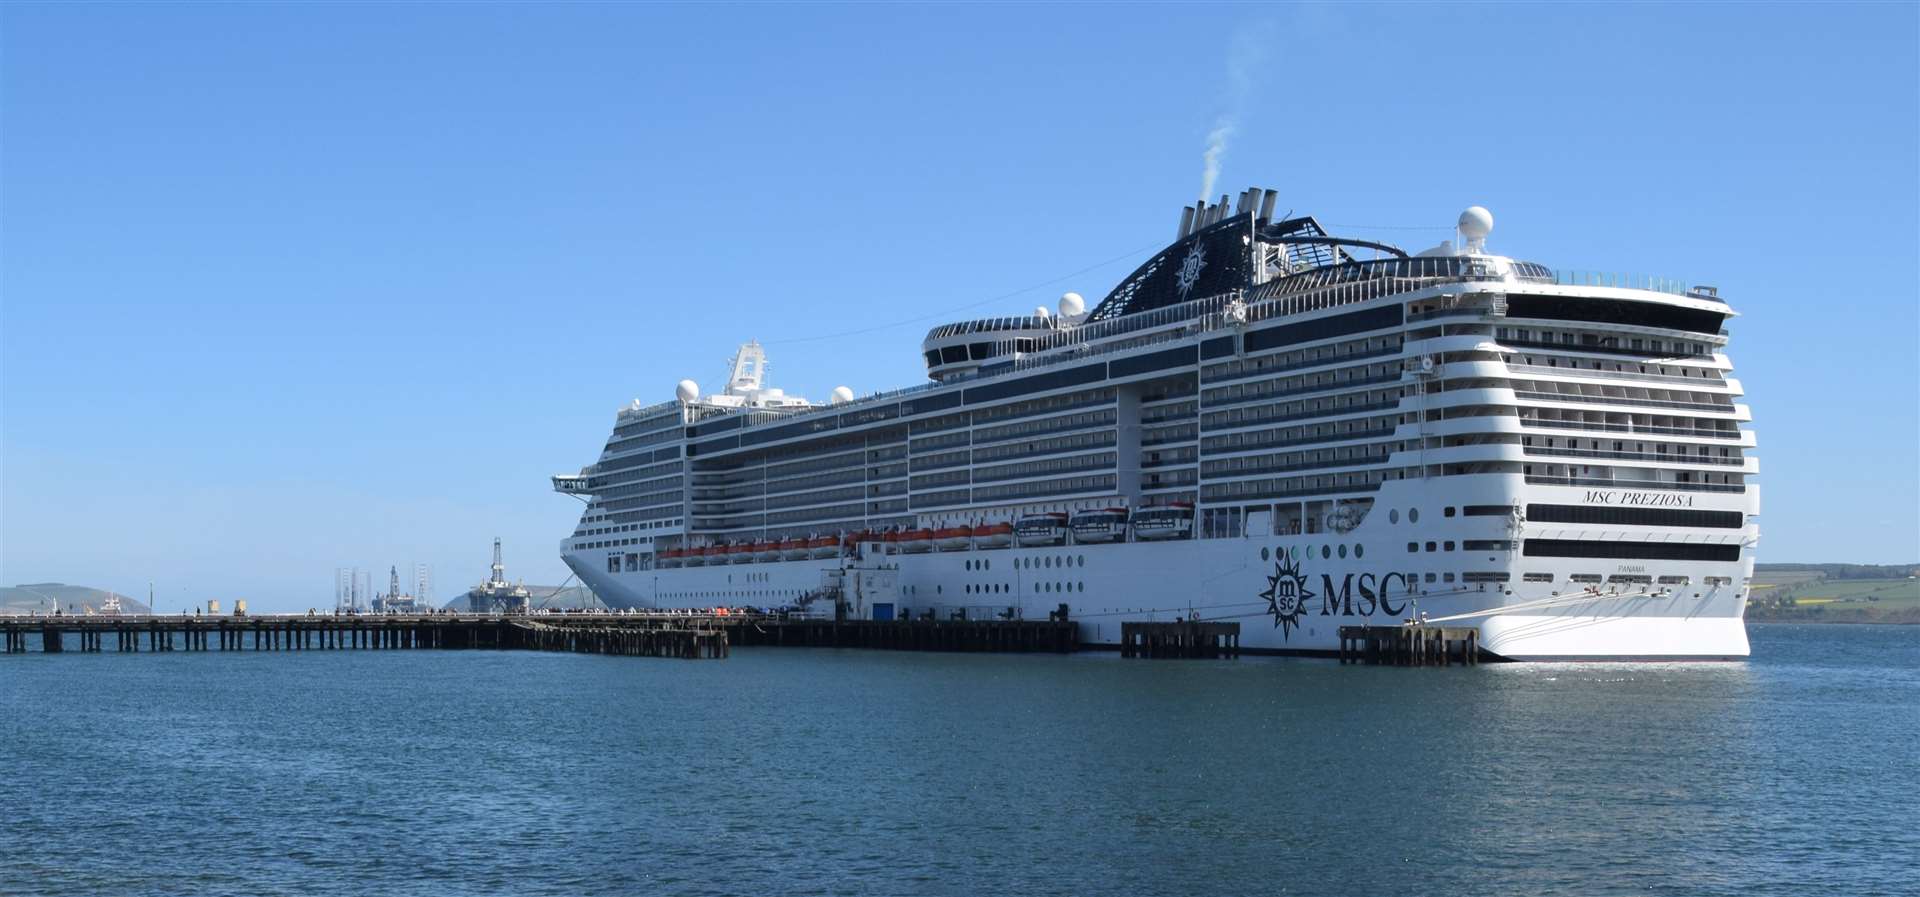 The MSC Preziosa at Invergordon during its debut appearance in the firth in May 2017.